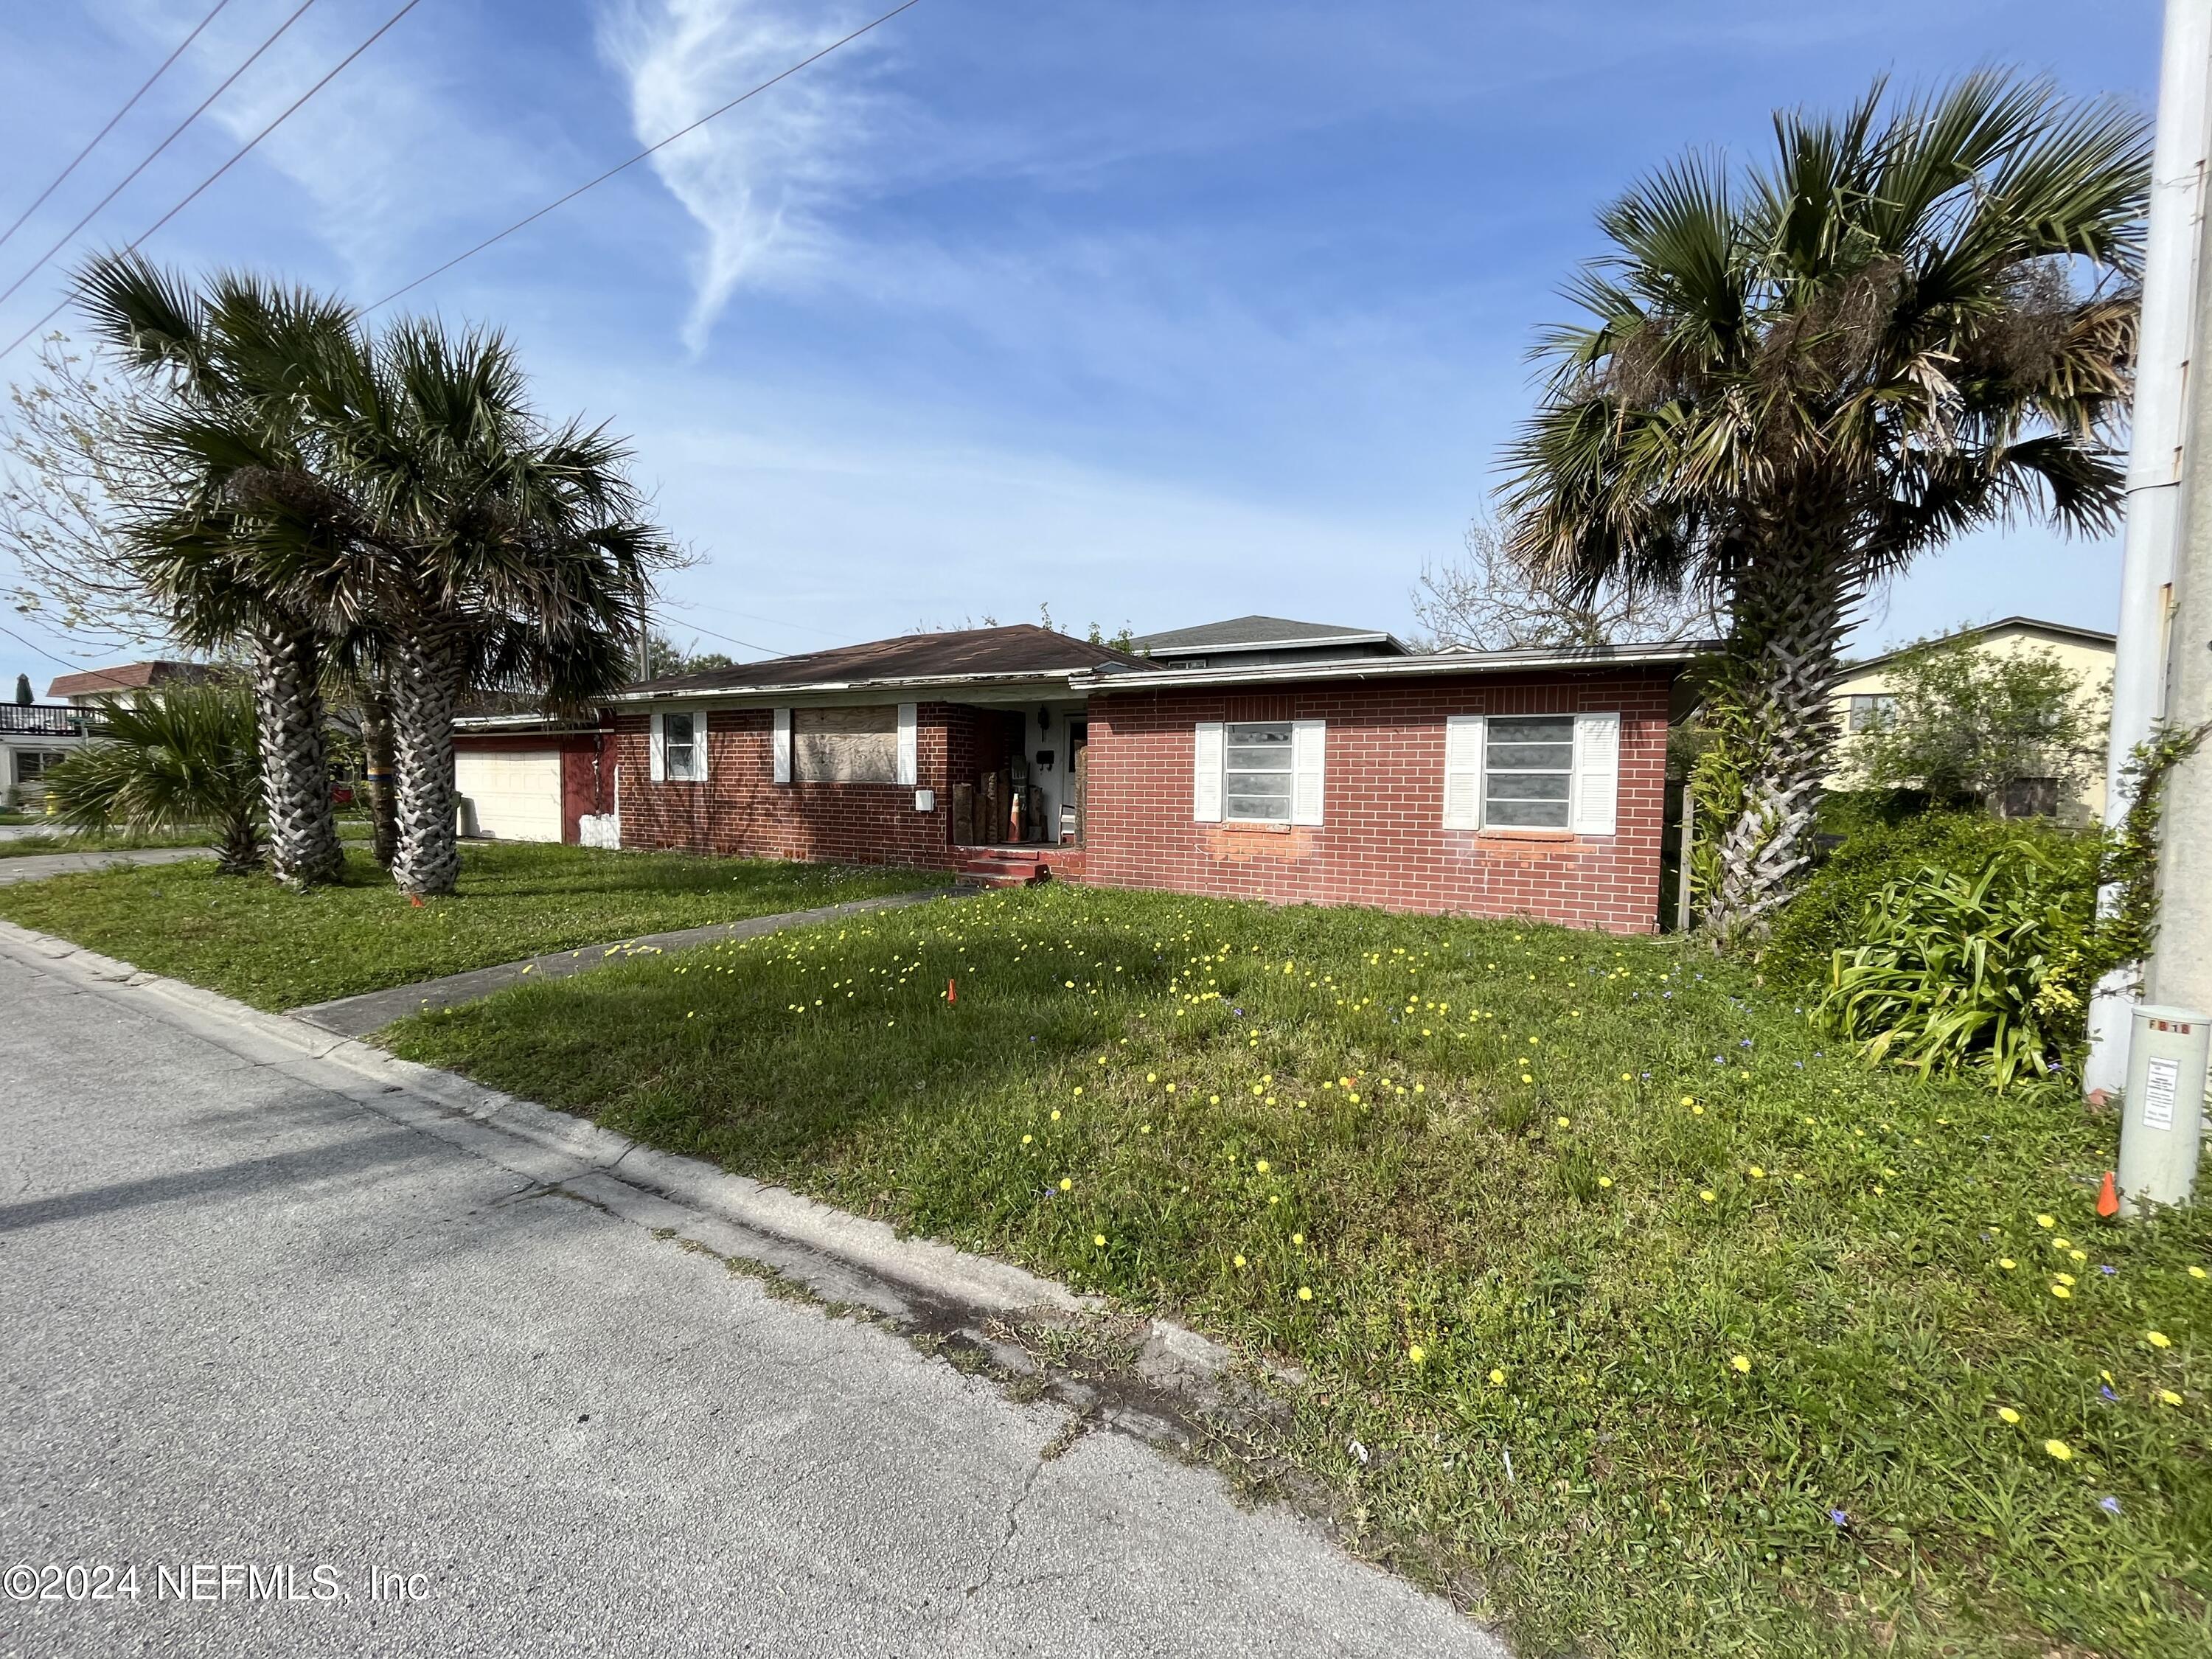 Jacksonville Beach, FL home for sale located at 818 S 4TH Street, Jacksonville Beach, FL 32250